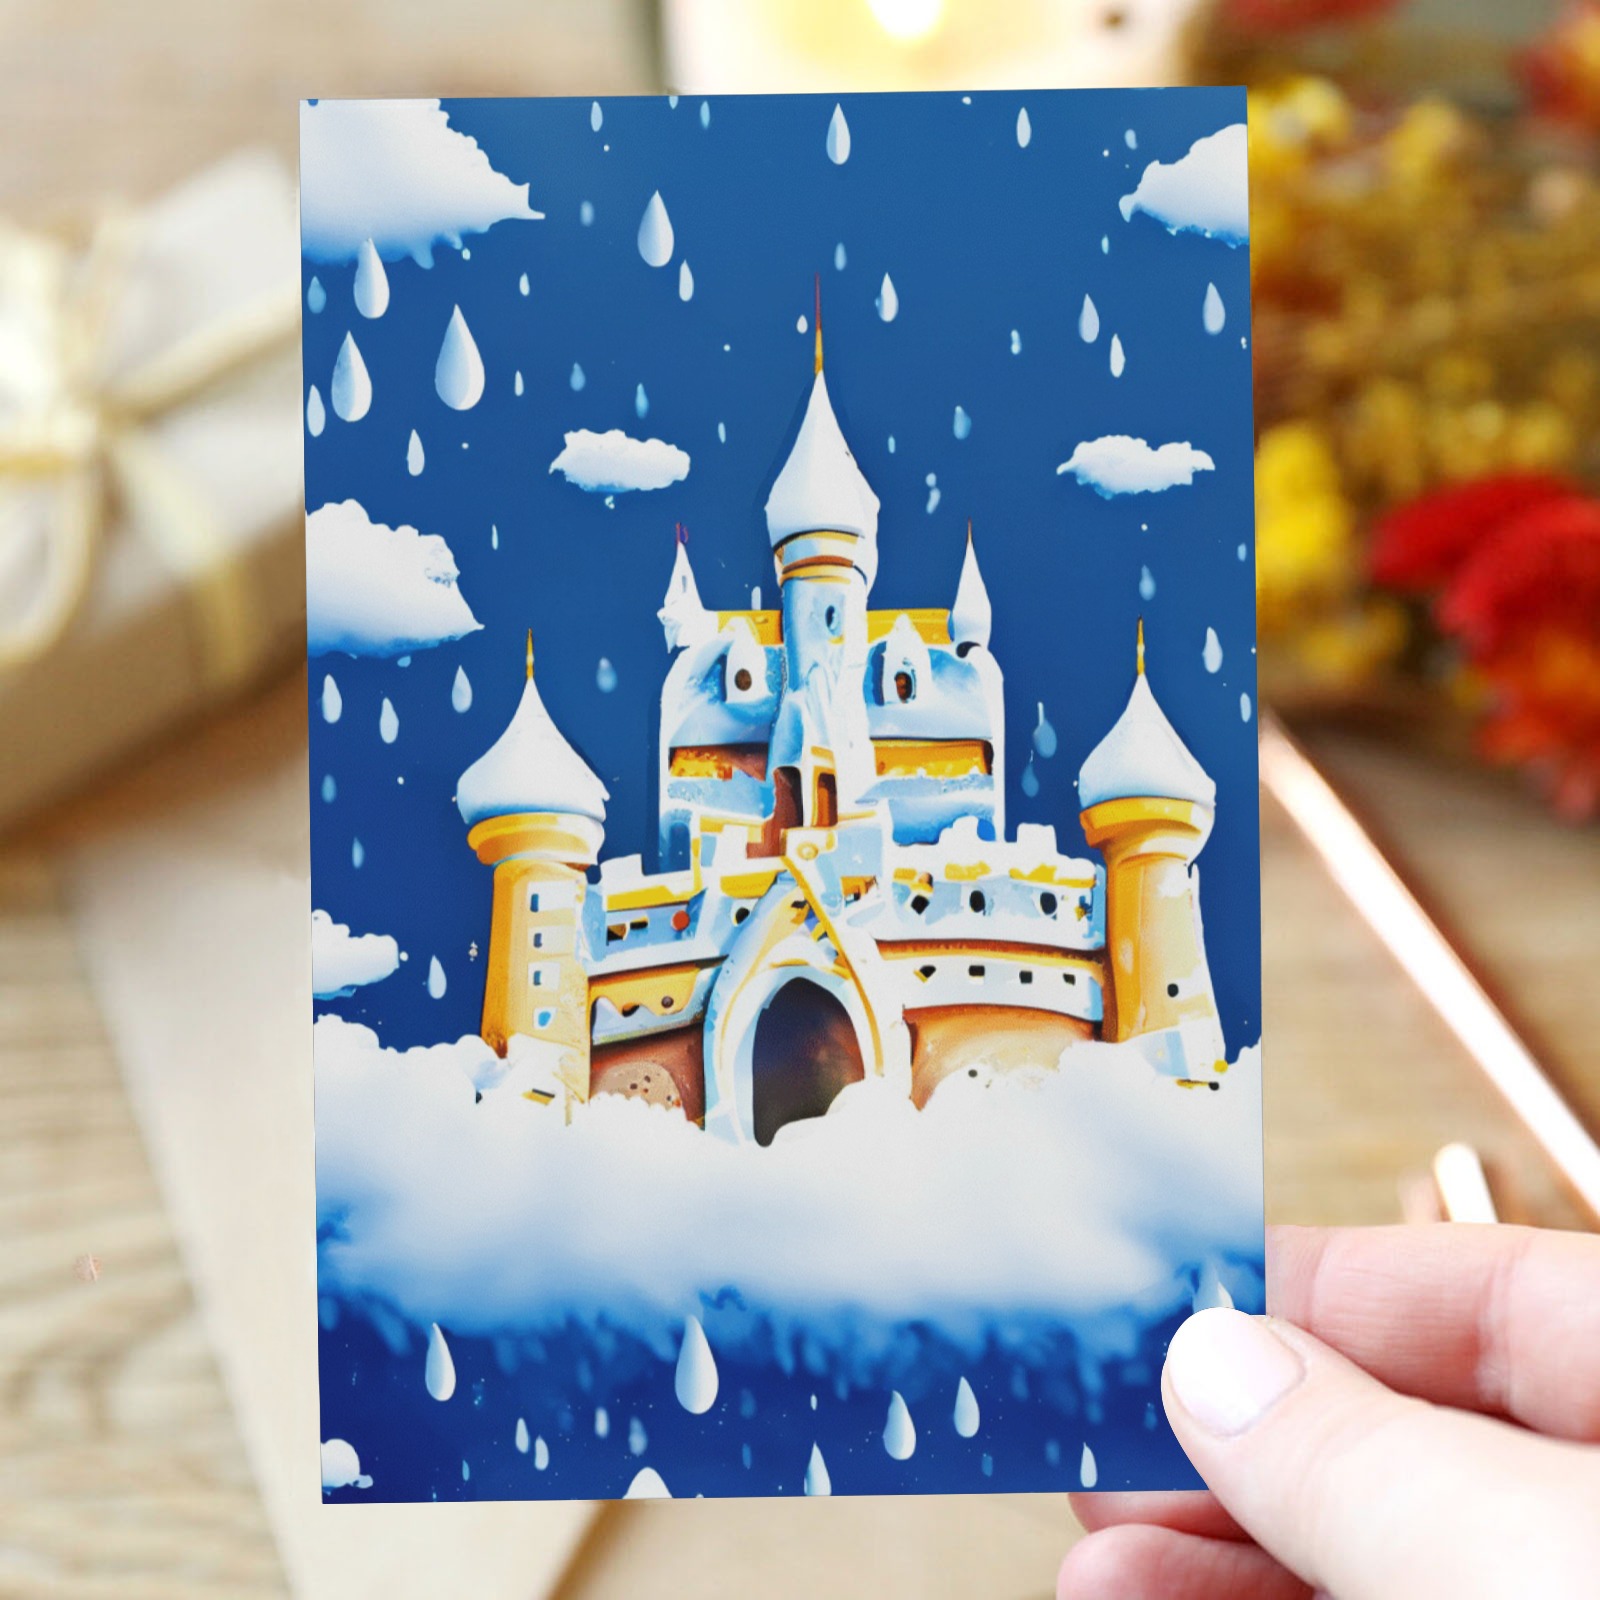 snowy background color paint droplets the image of a castle on clouds 1 Greeting Card 4"x6"